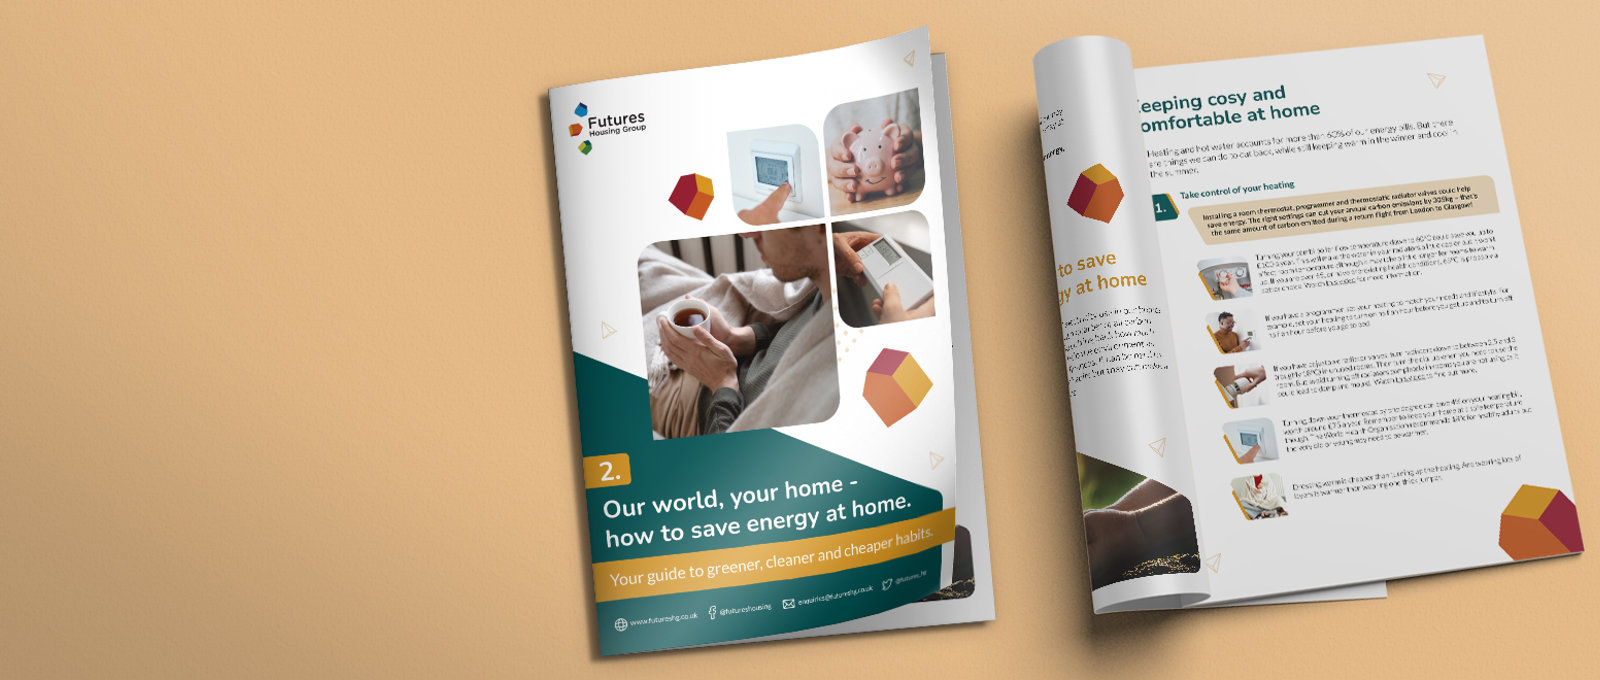 A digital mock-up of the second issue of 'Our world, your home: How to save energy at home' guide